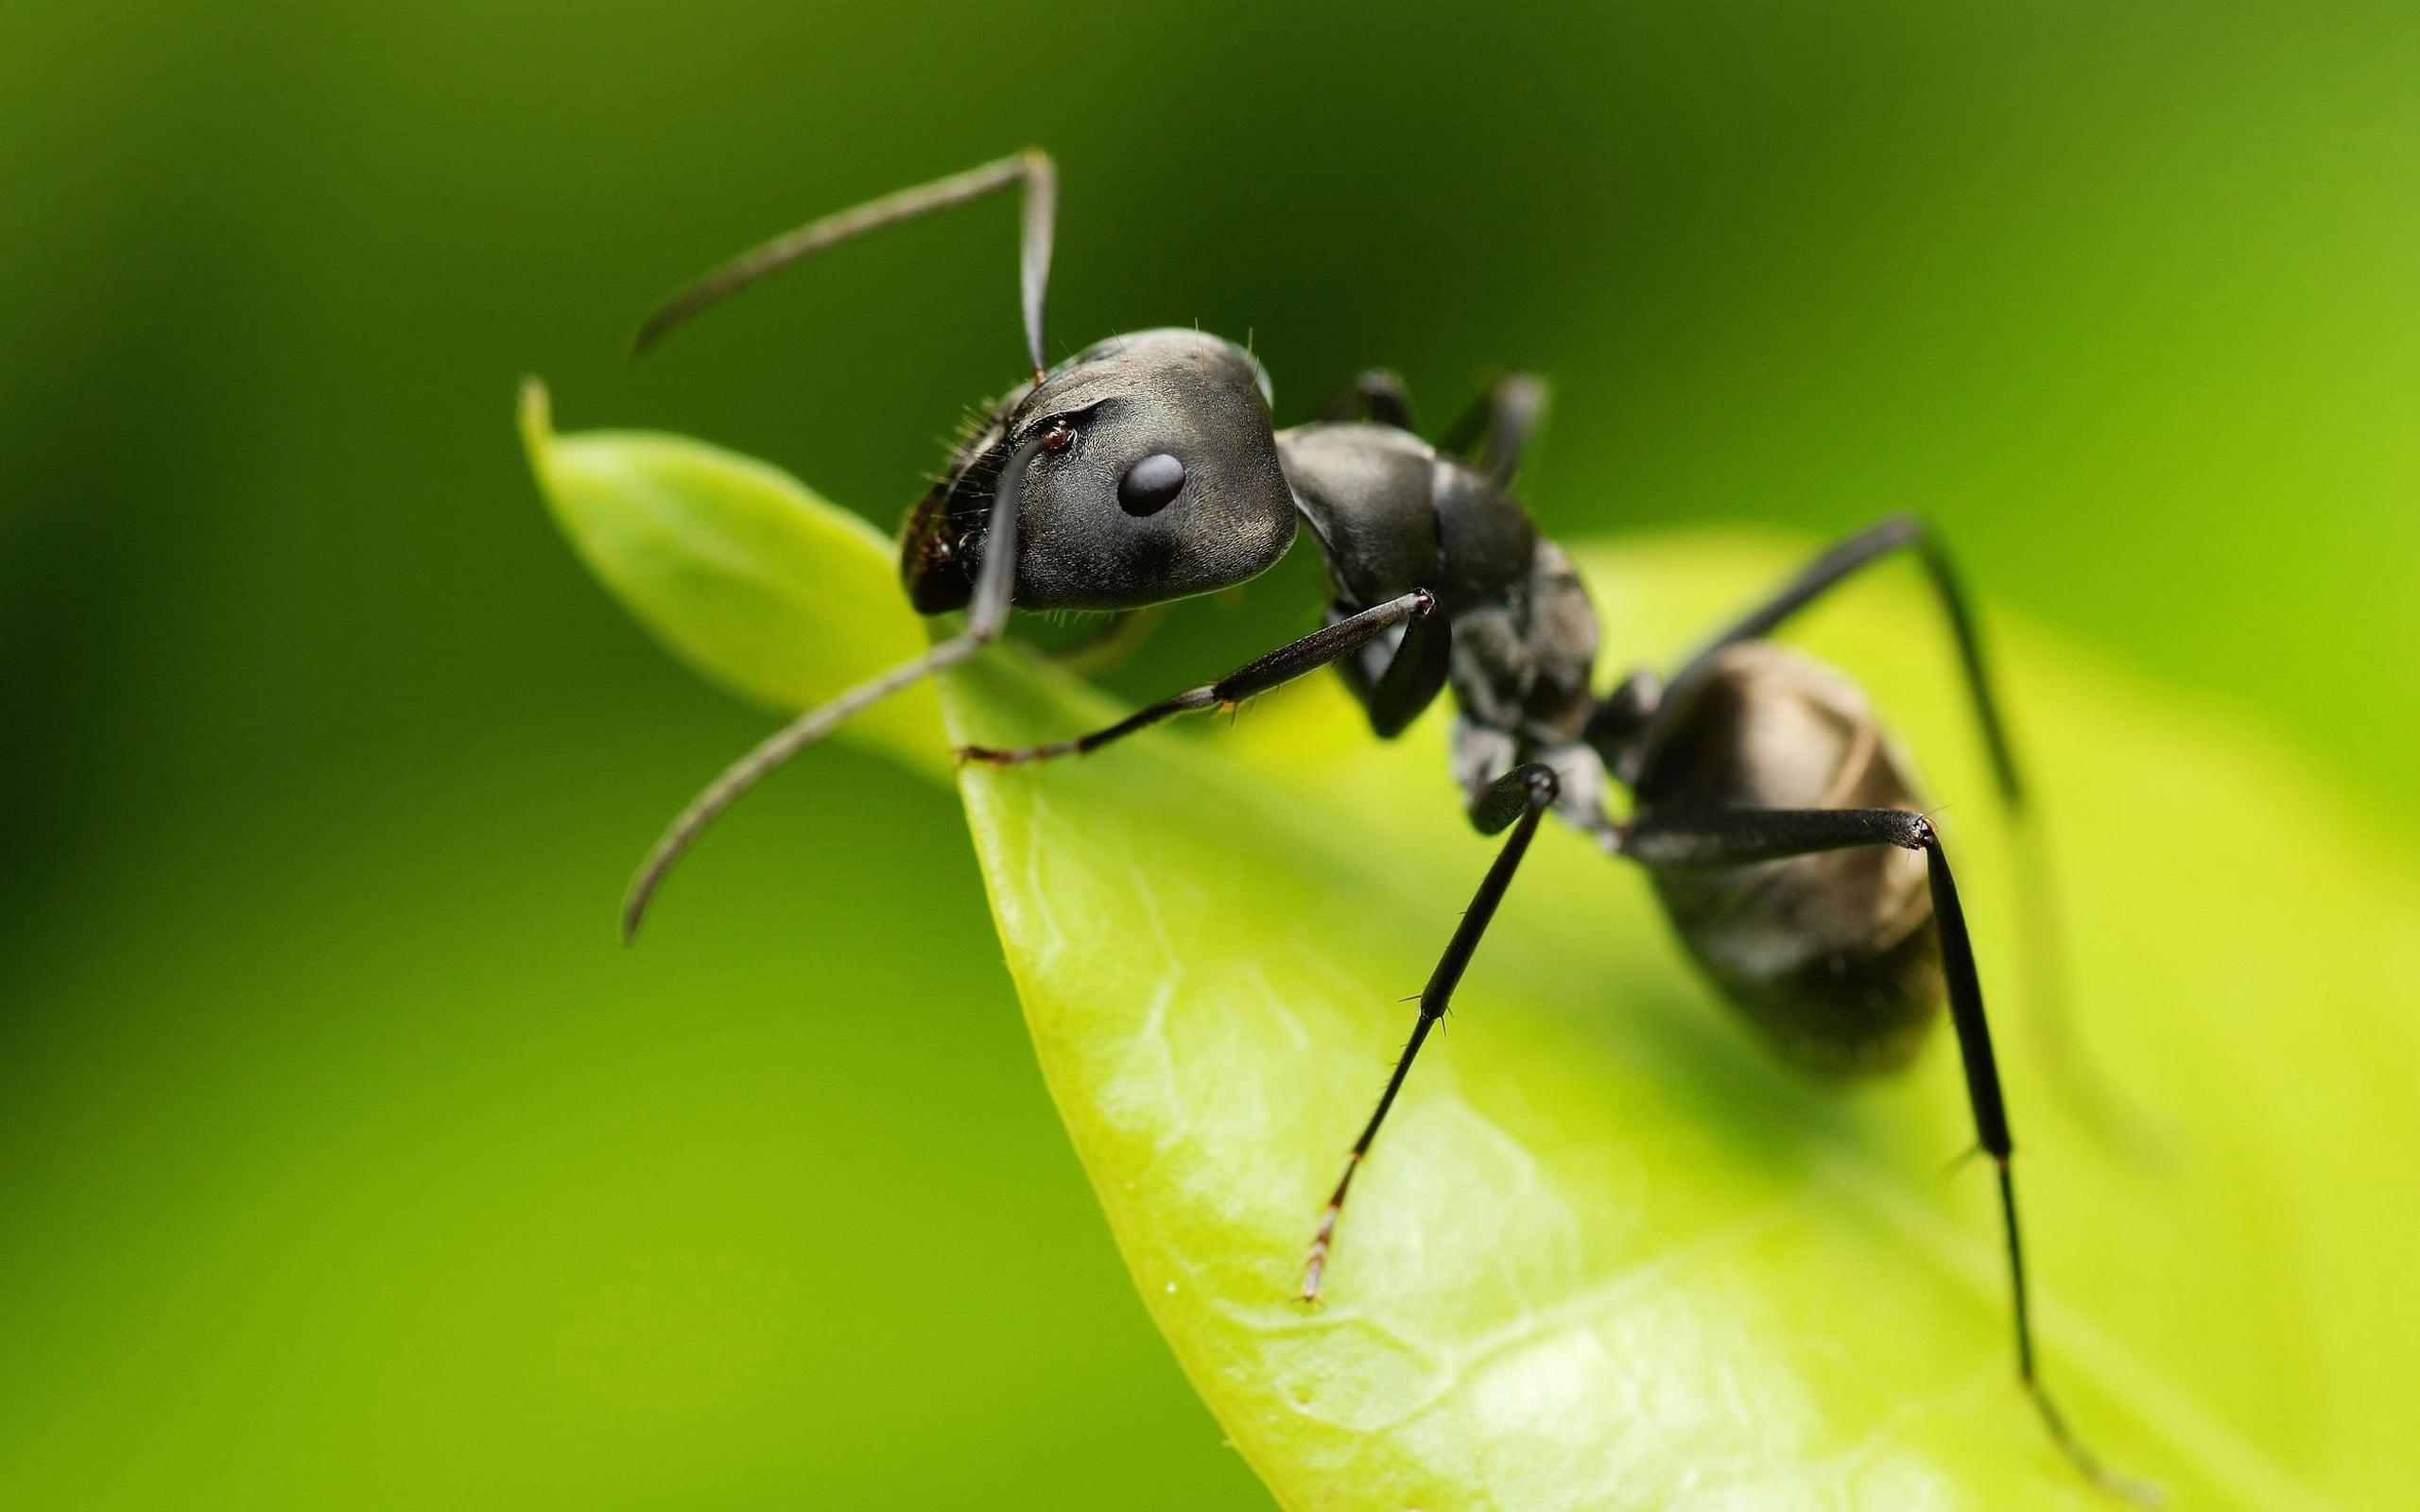 Close Up Photography Of Carpenter Ant On Green Leaf During